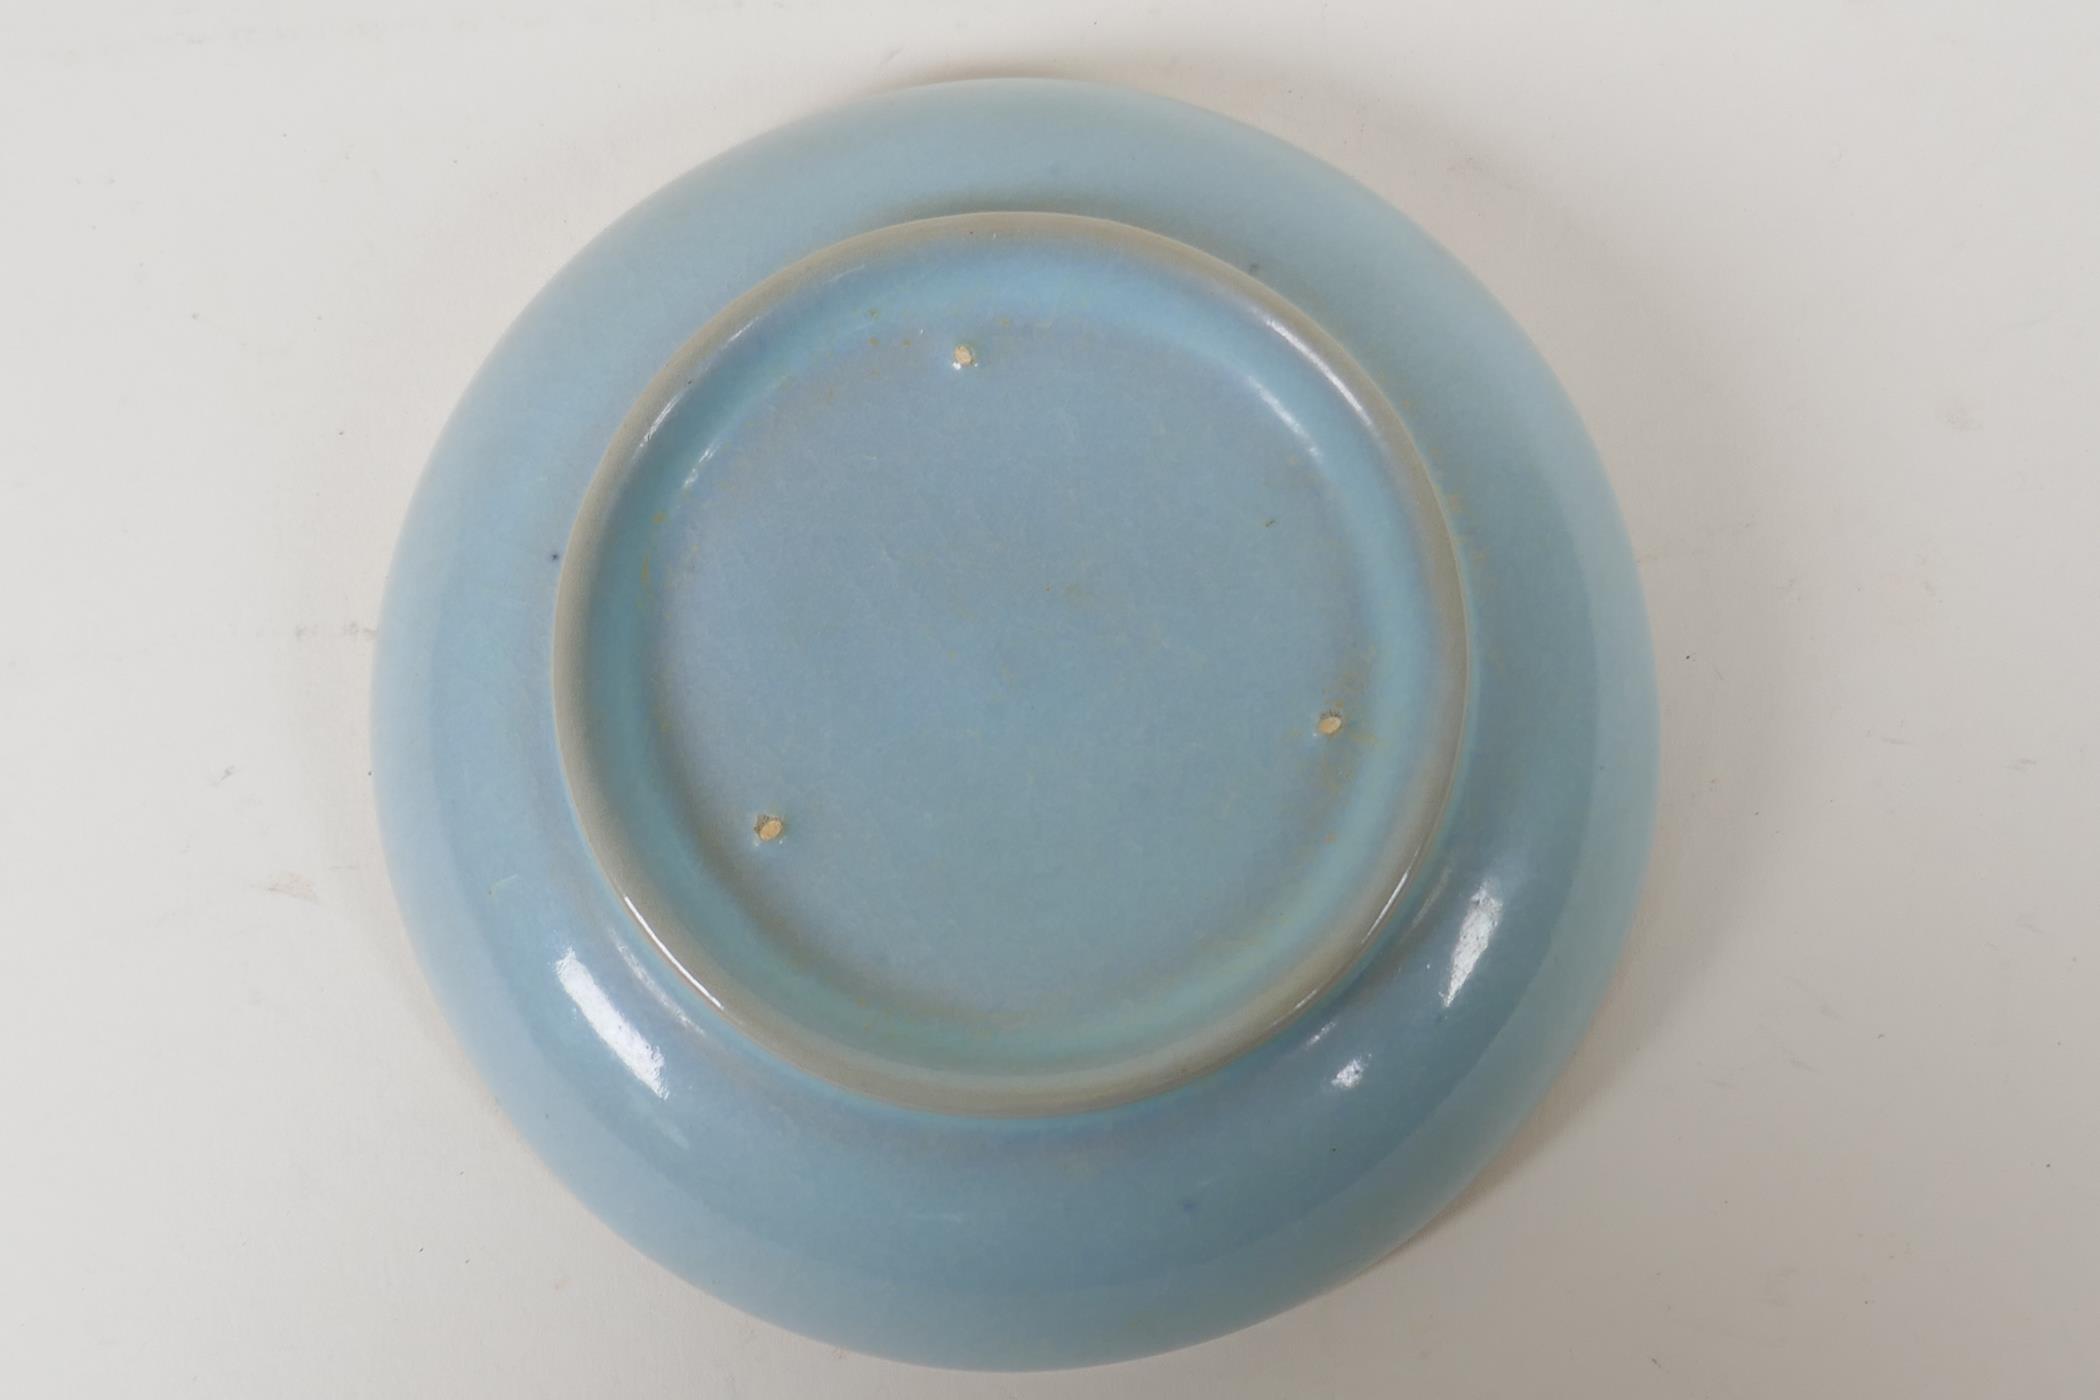 A Chinese Ru ware style porcelain dish, 5½" diameter - Image 3 of 3